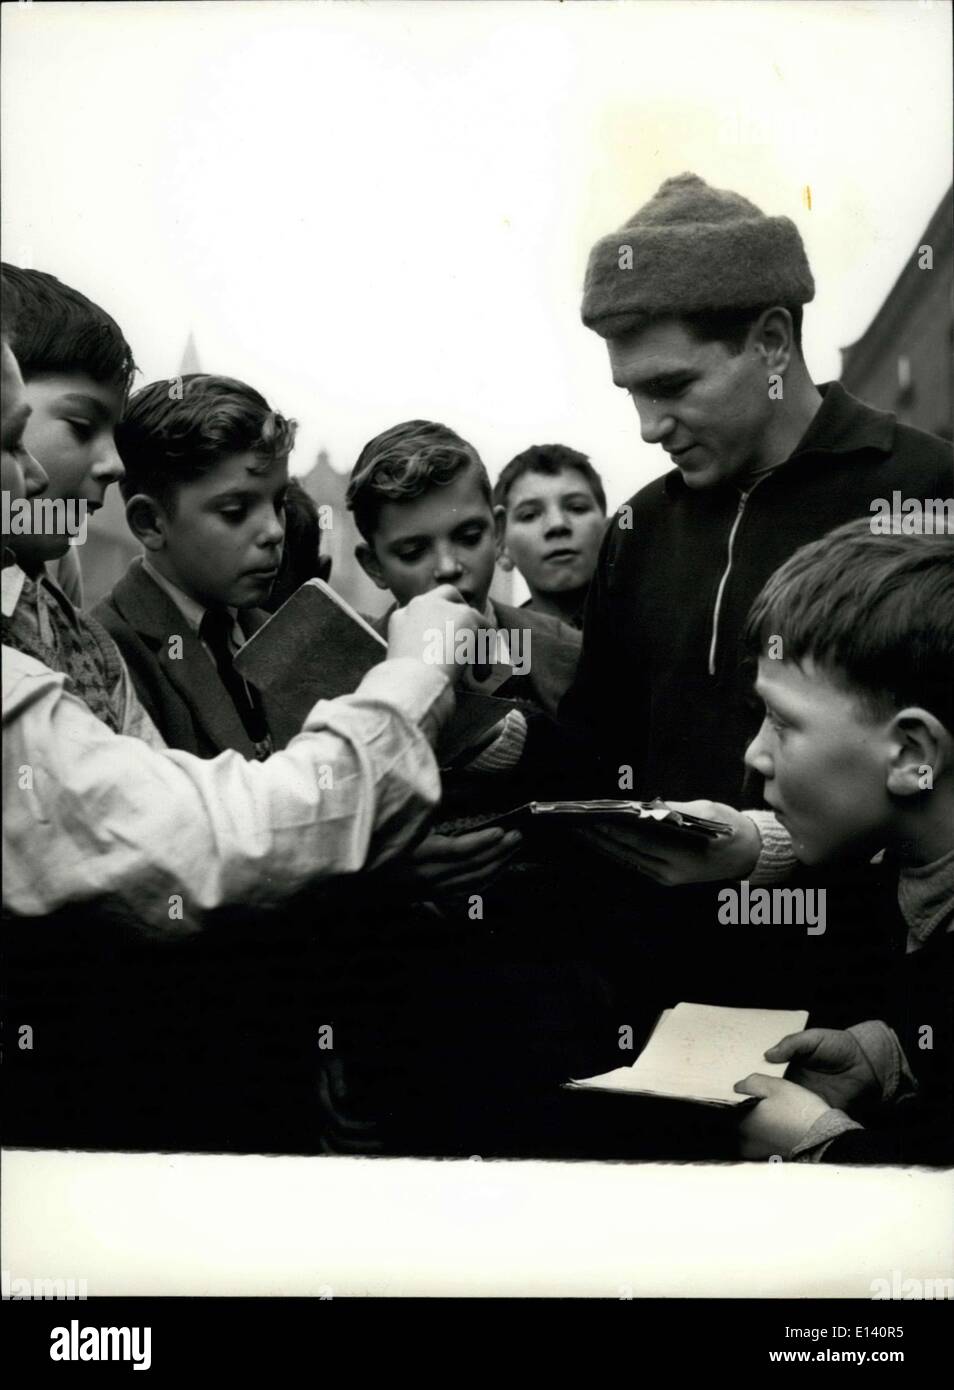 Mar. 31, 2012 - Bobby Neill's Local Admirers. All the local boys wait for Bobby to do his road work around his Maida Hill home. He has signed most of their autographs book already. They are sure he is a future champion. Stock Photo